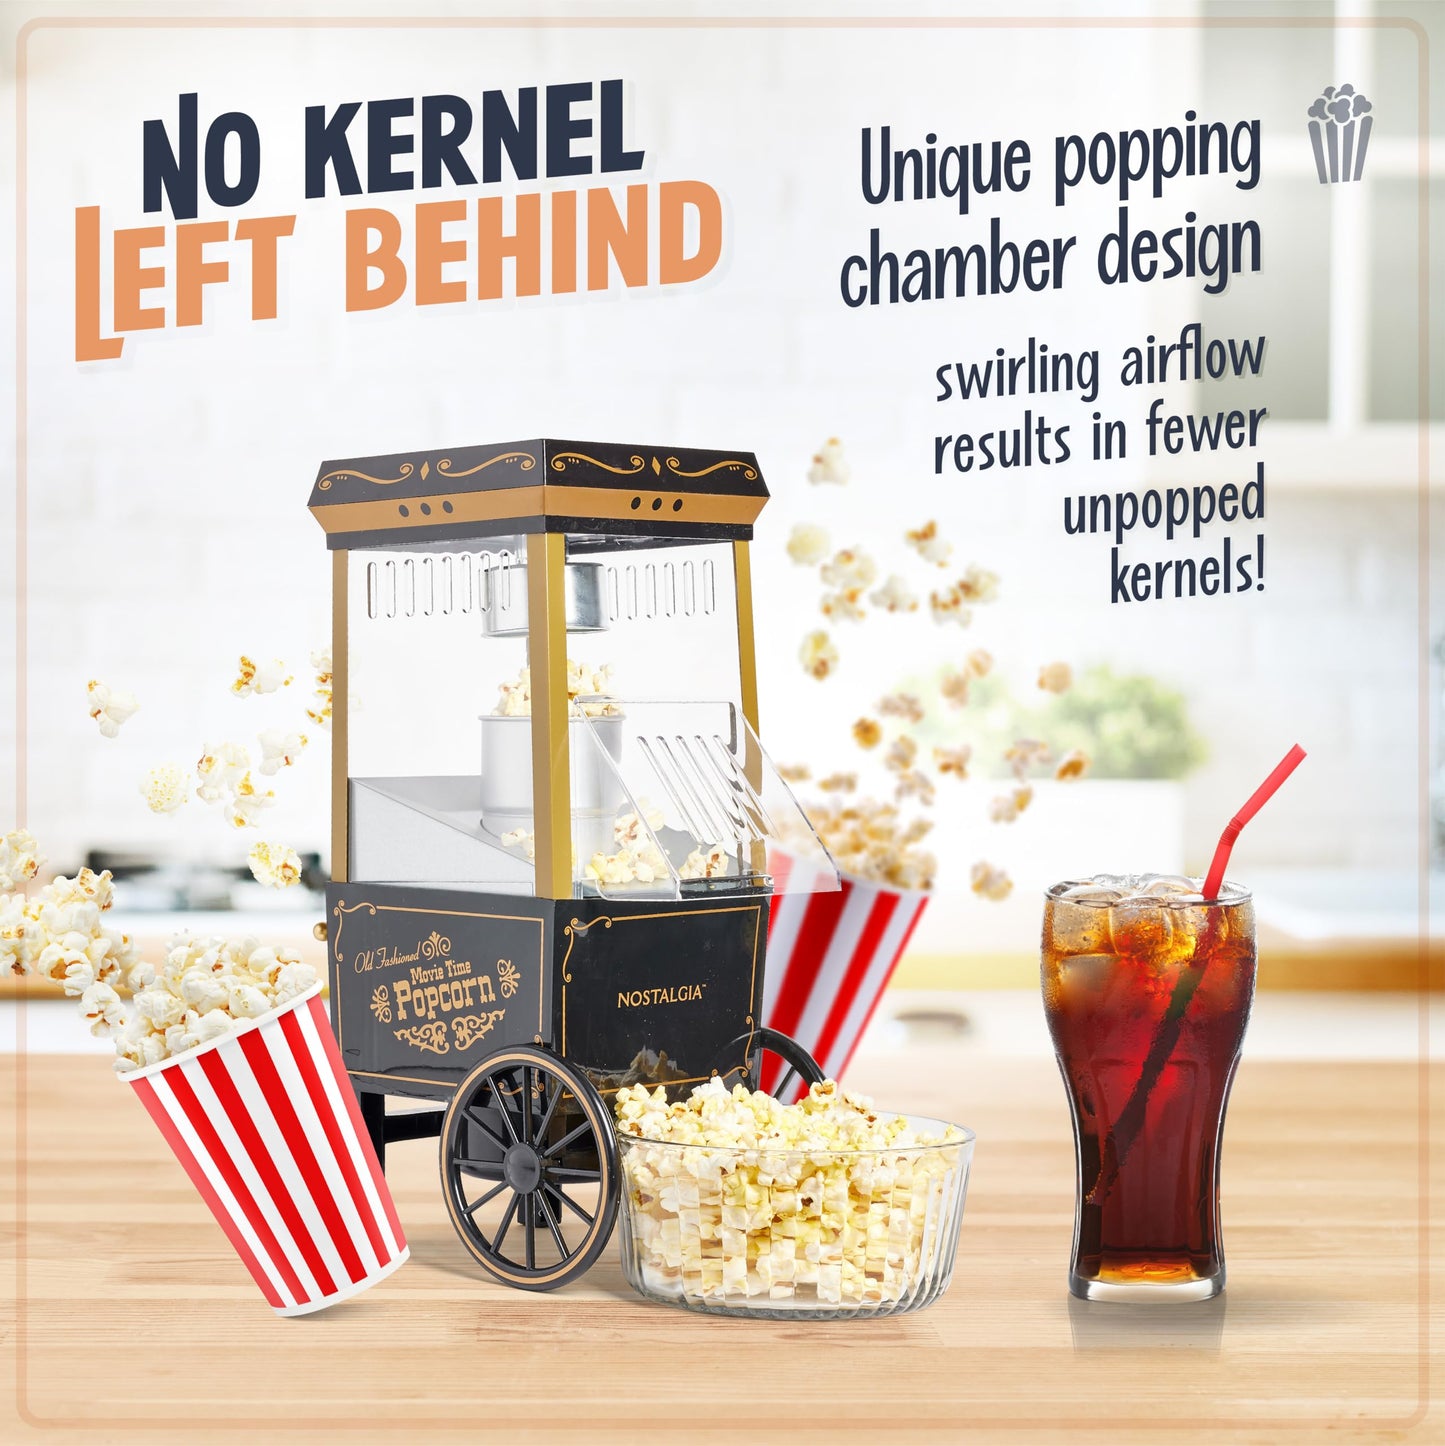 Nostalgia Old-Fashioned Hot Air Popcorn Paker, 12 Cup Vintage Tabletop Popcorn Machine with Measuring Cap for Home, Parties, Movie Night, and Kids, 12 Cup, Black